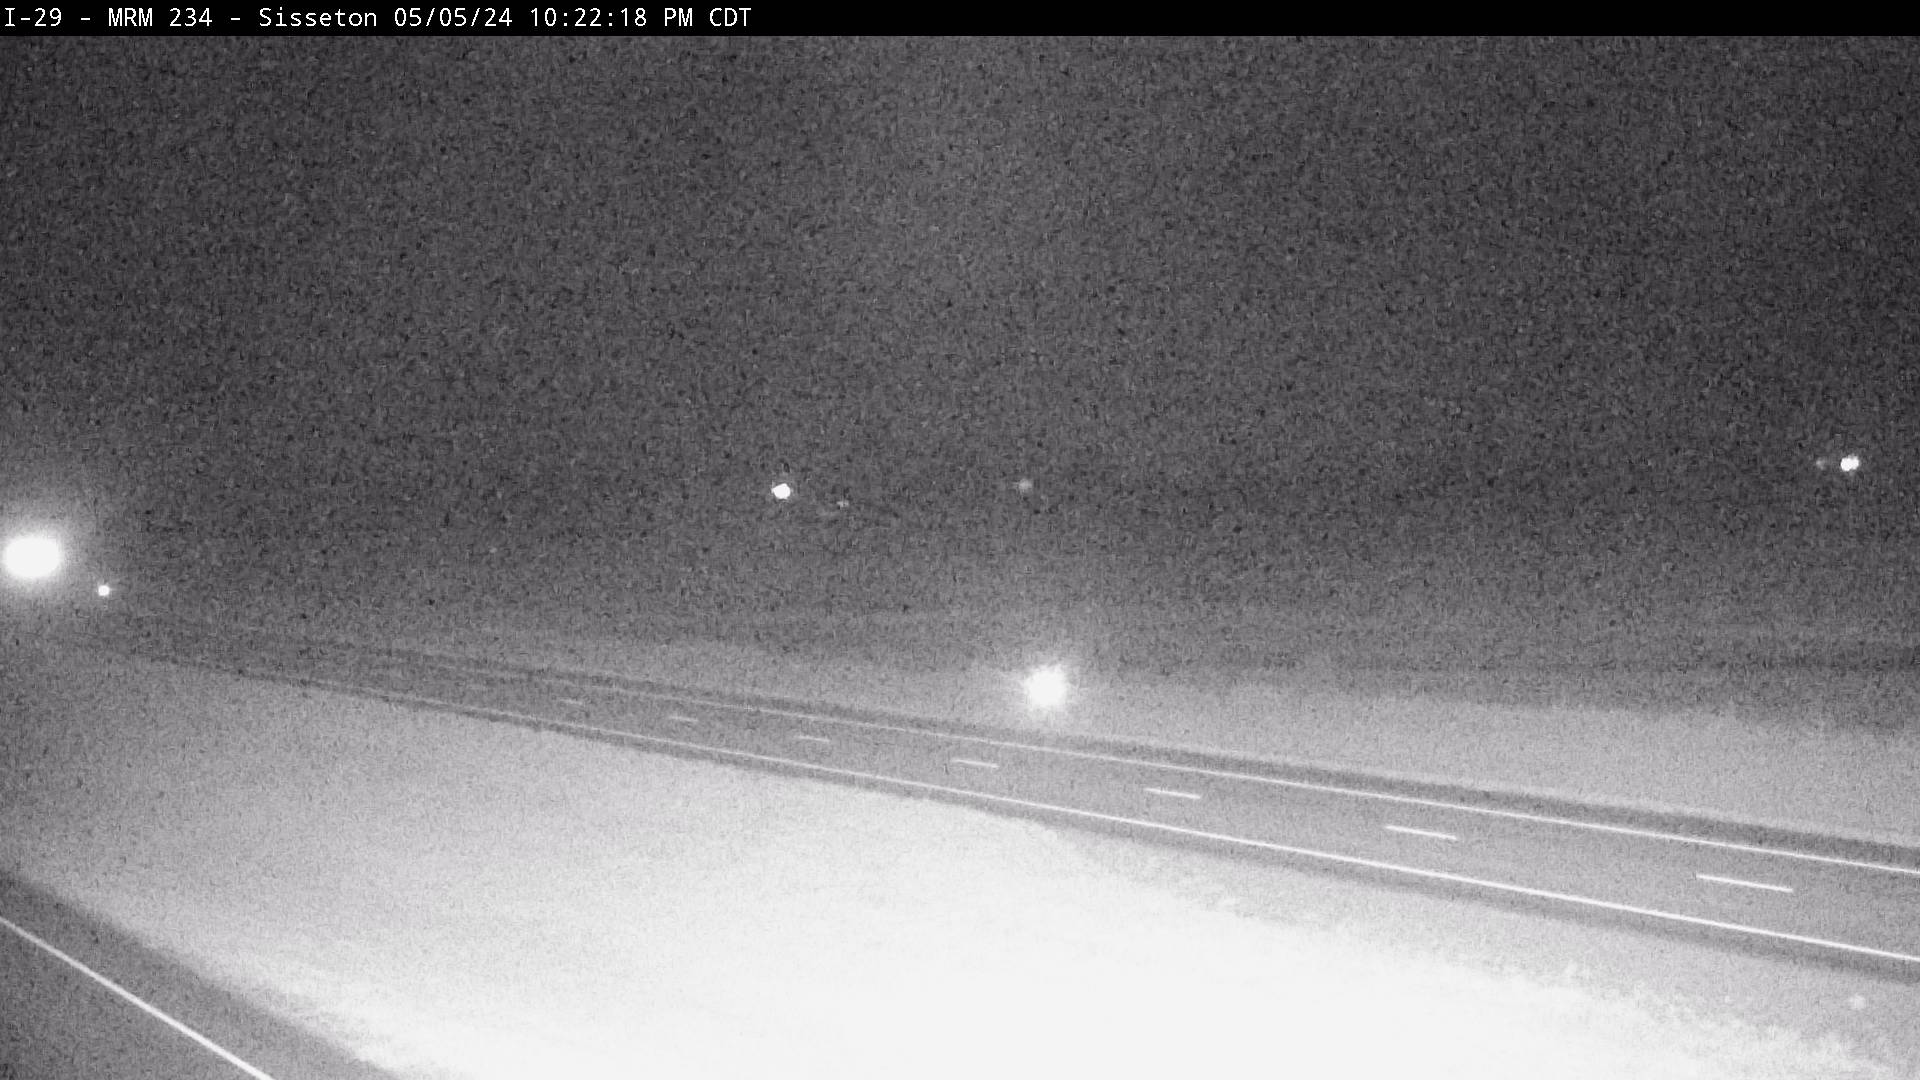 Traffic Cam North of town along I-29 @ MP 234 - North Player